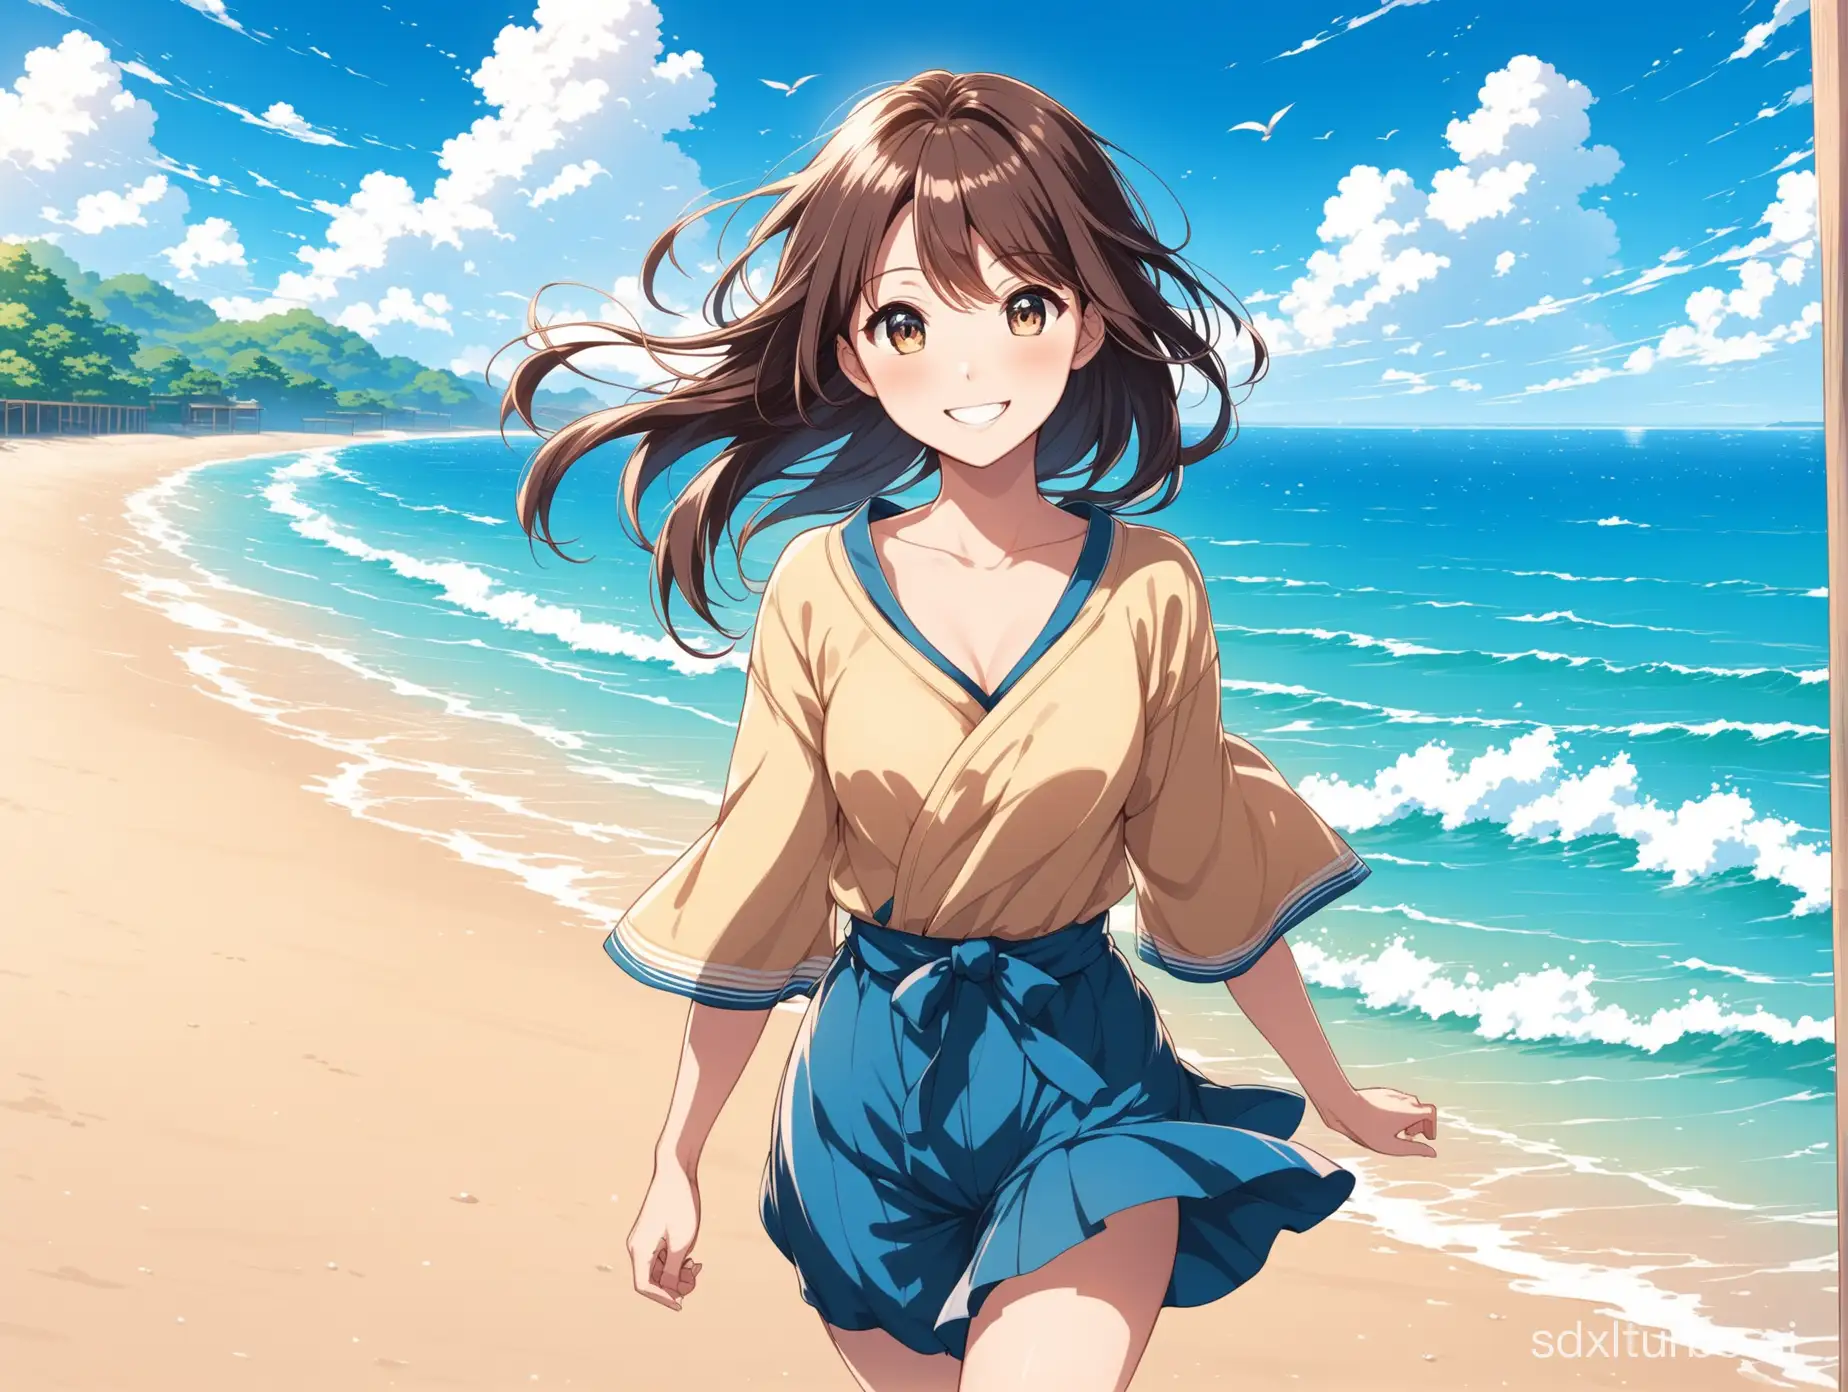 Japanese anime style, front view, smile in the wind, a girl is walking at the beach